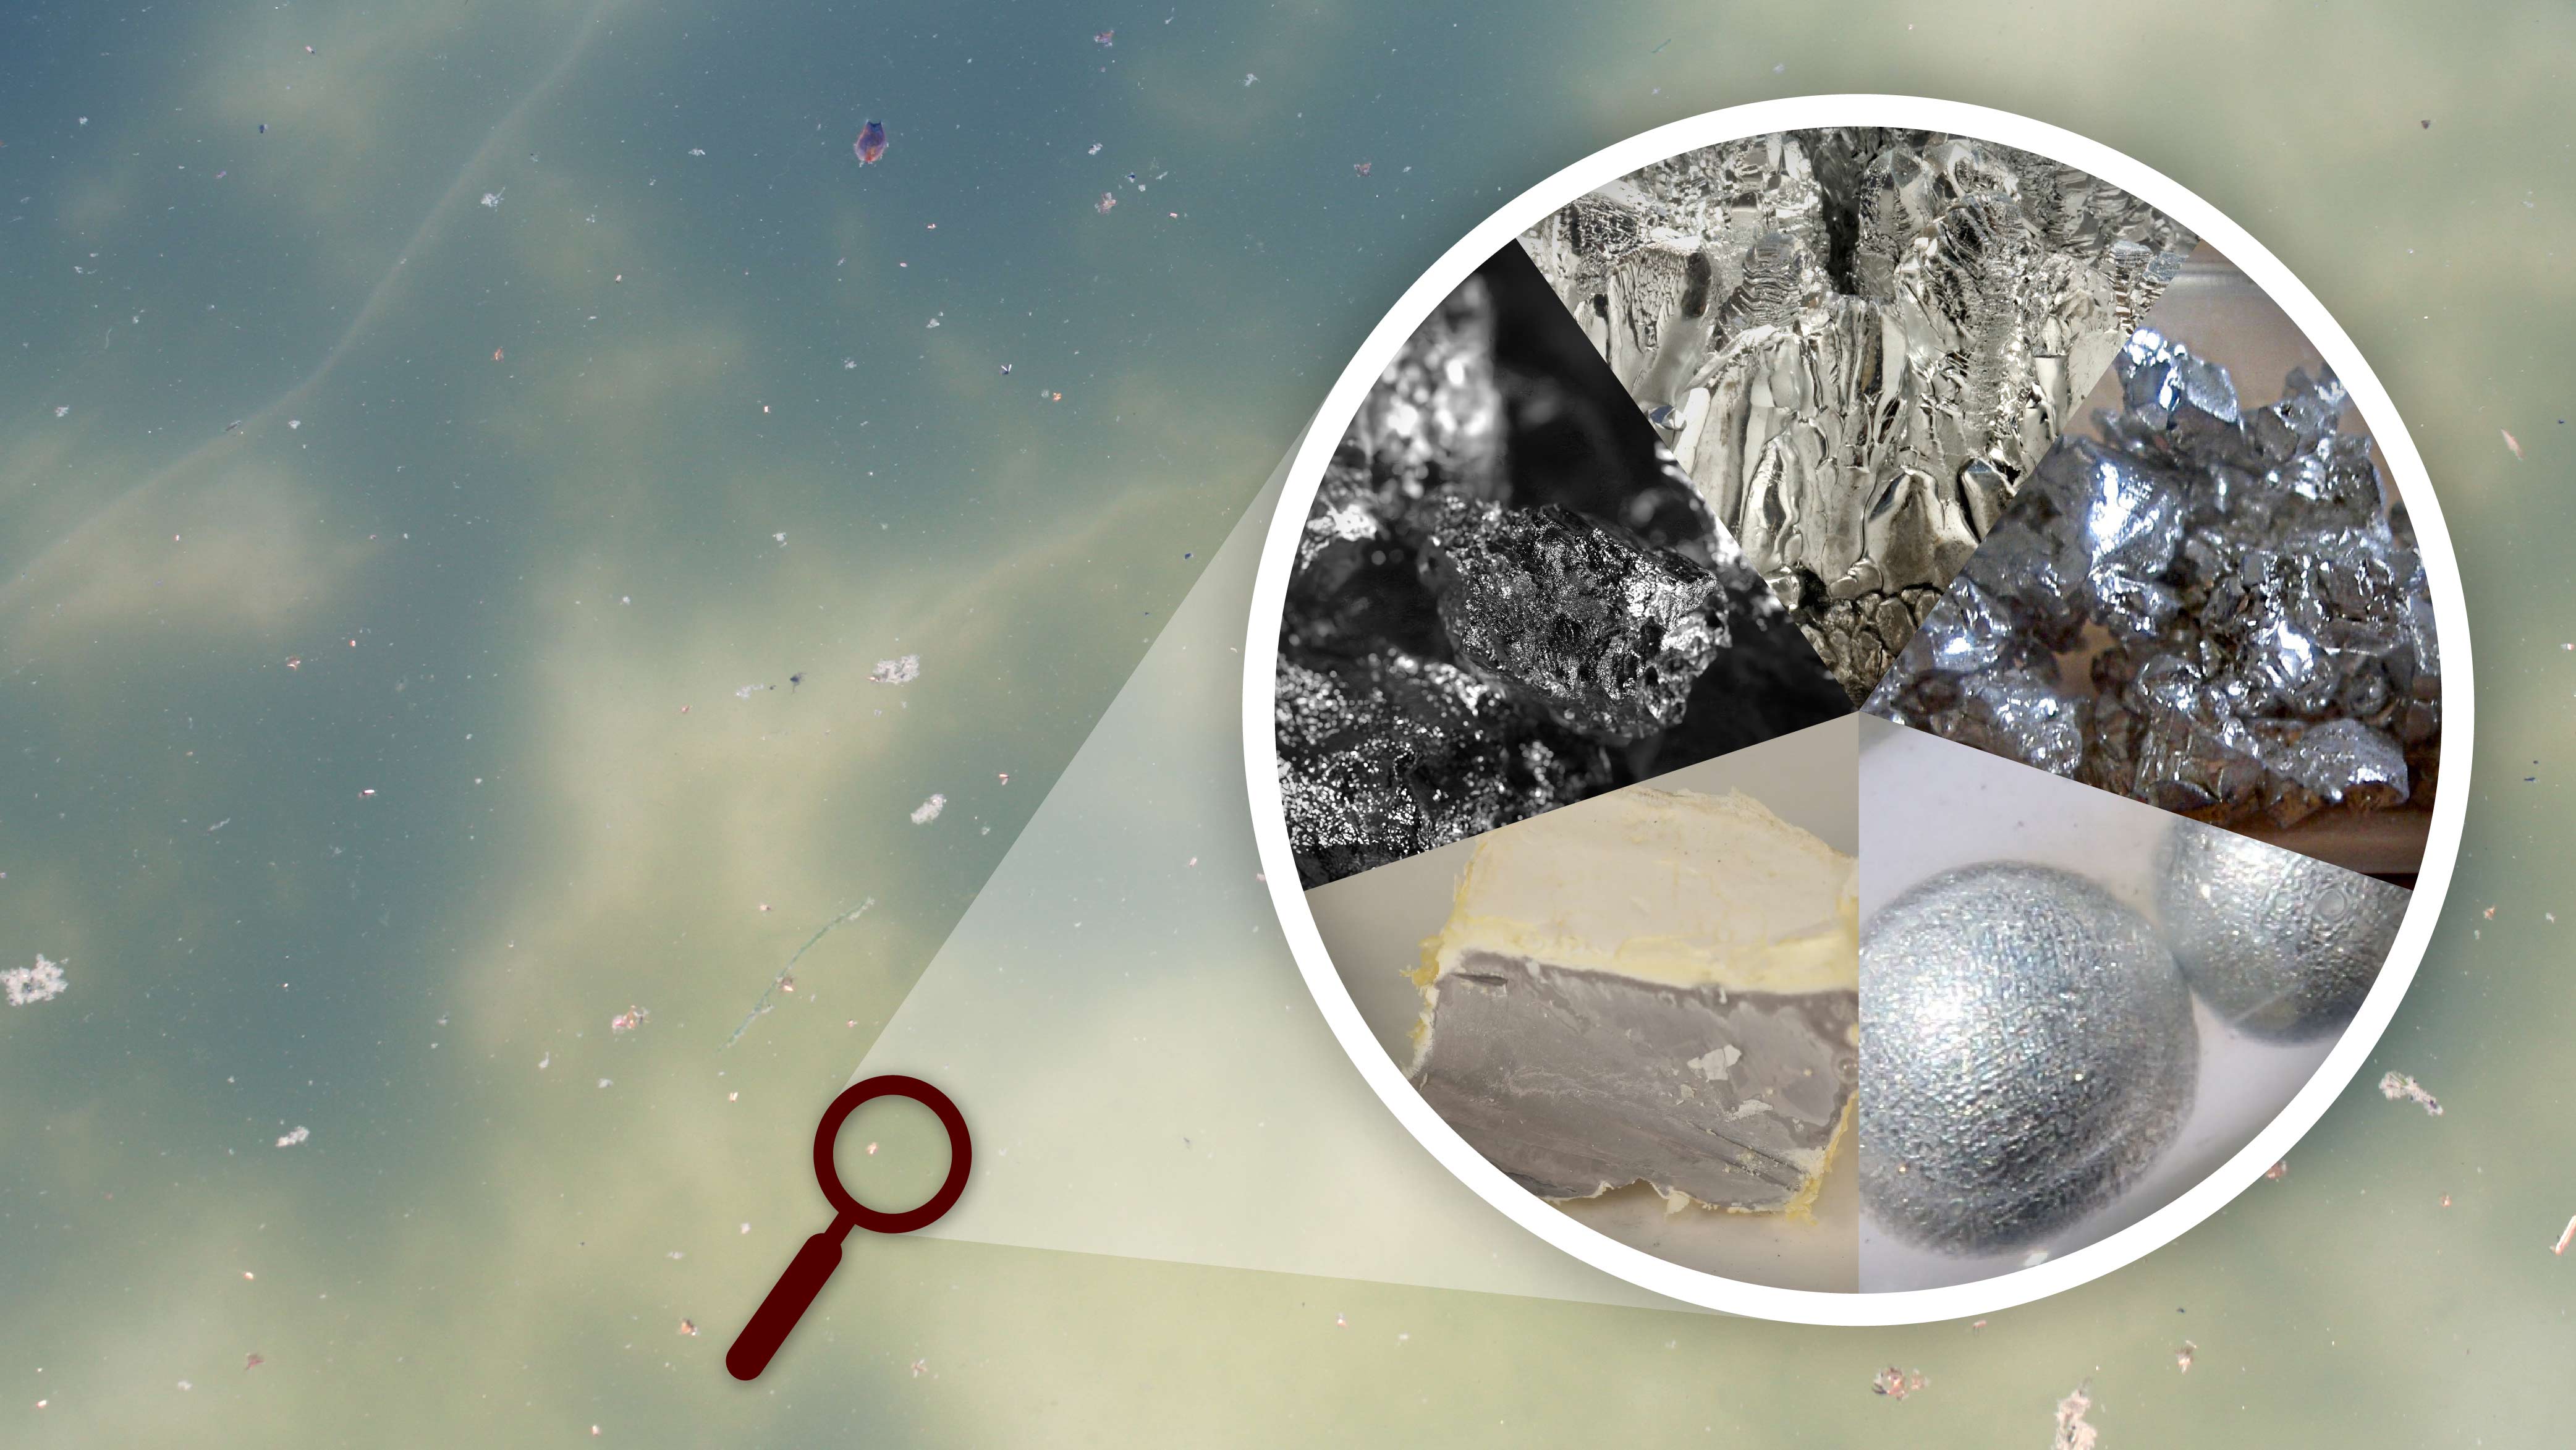 Dirty fluid background with a magnifying circle inset showing clean close-ups of several mineral compounds.